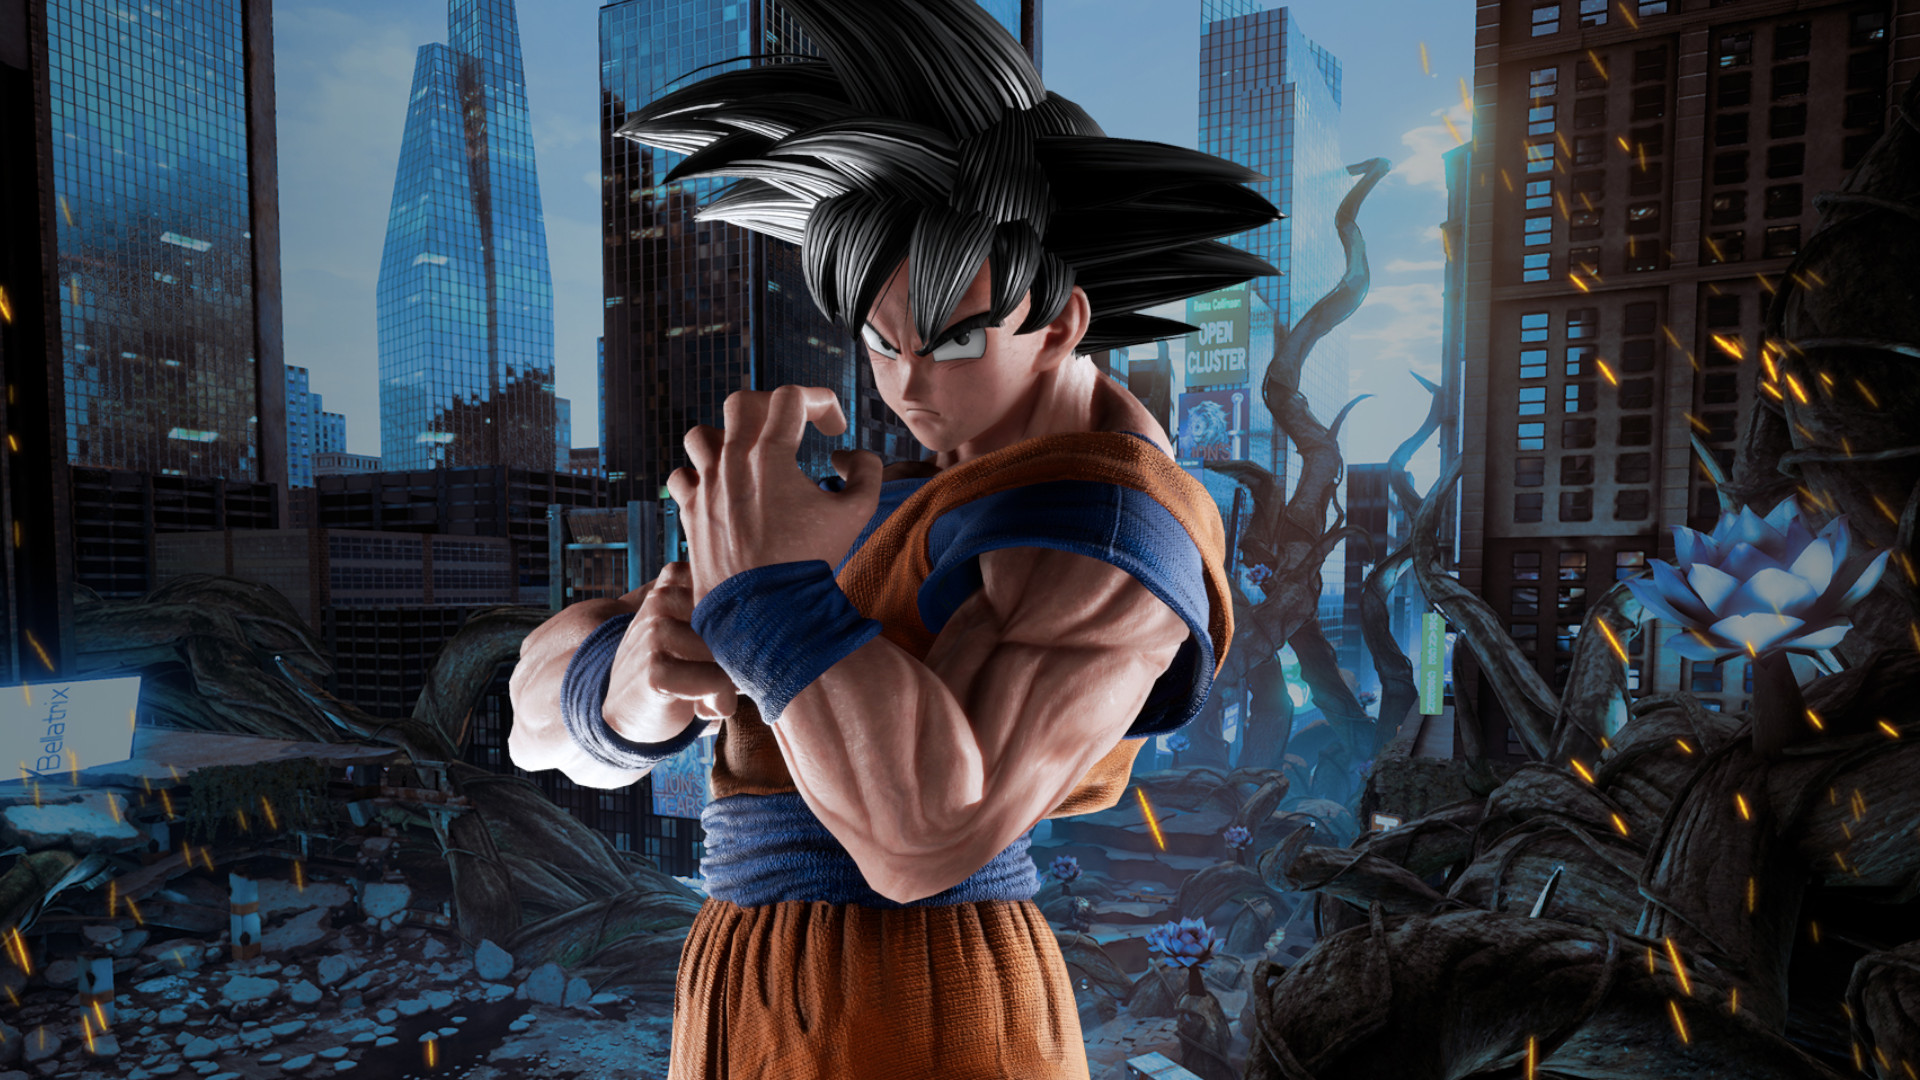 Anime fighting game Jump Force and all its DLC will be delisted in 2022 – alas, poor Goku